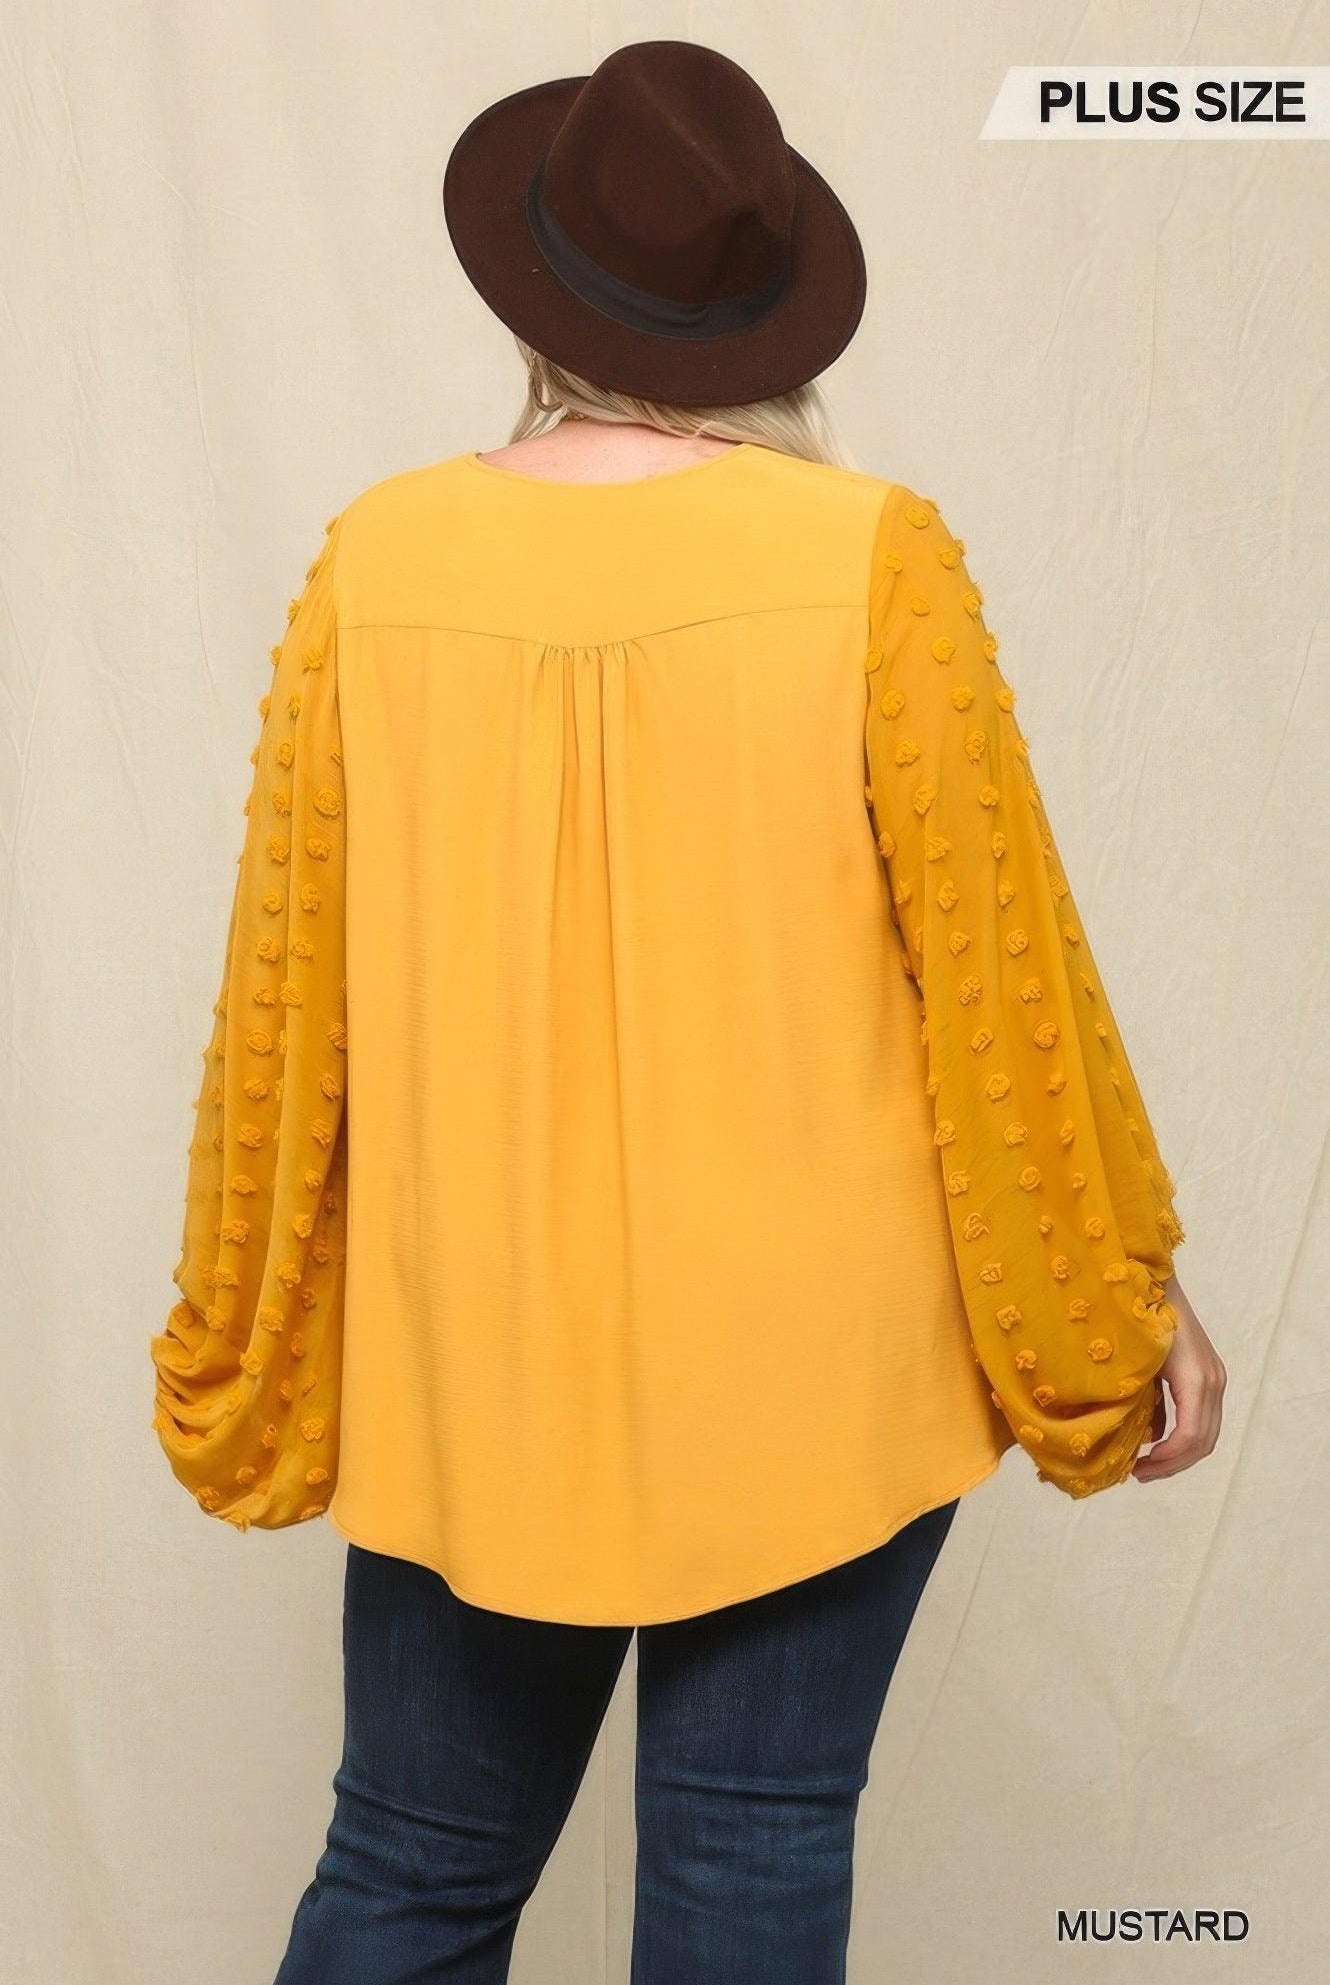 Women's Shirts Woven And Textured Chiffon Top With Voluminous Sheer Sleeves